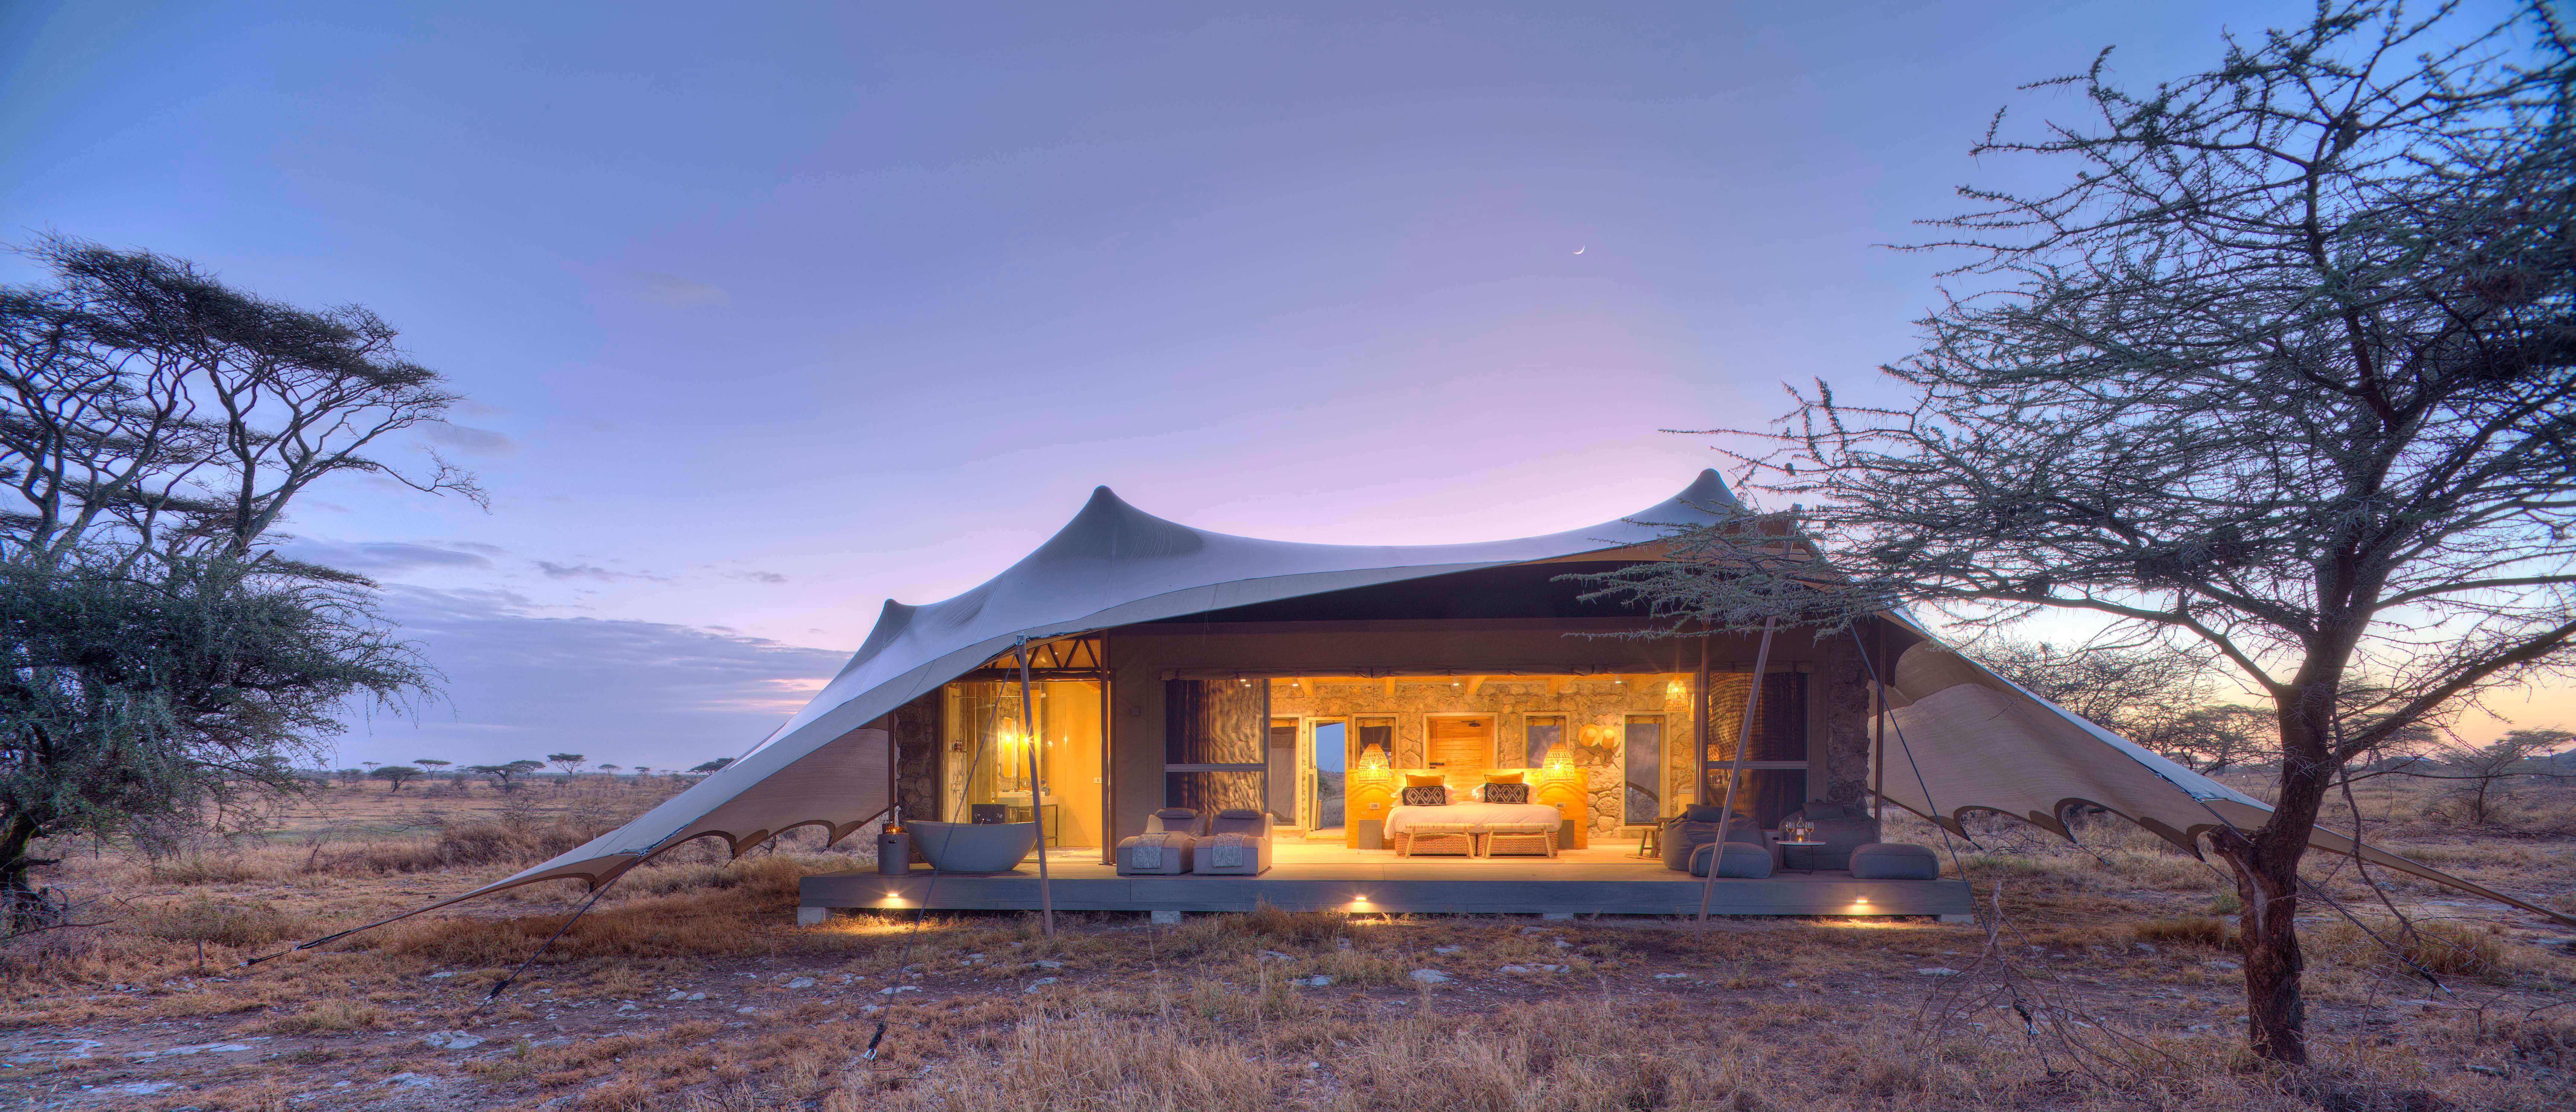 Namiri Plains tent at dawn - purple and blue hues with the bedroom lights sparkling